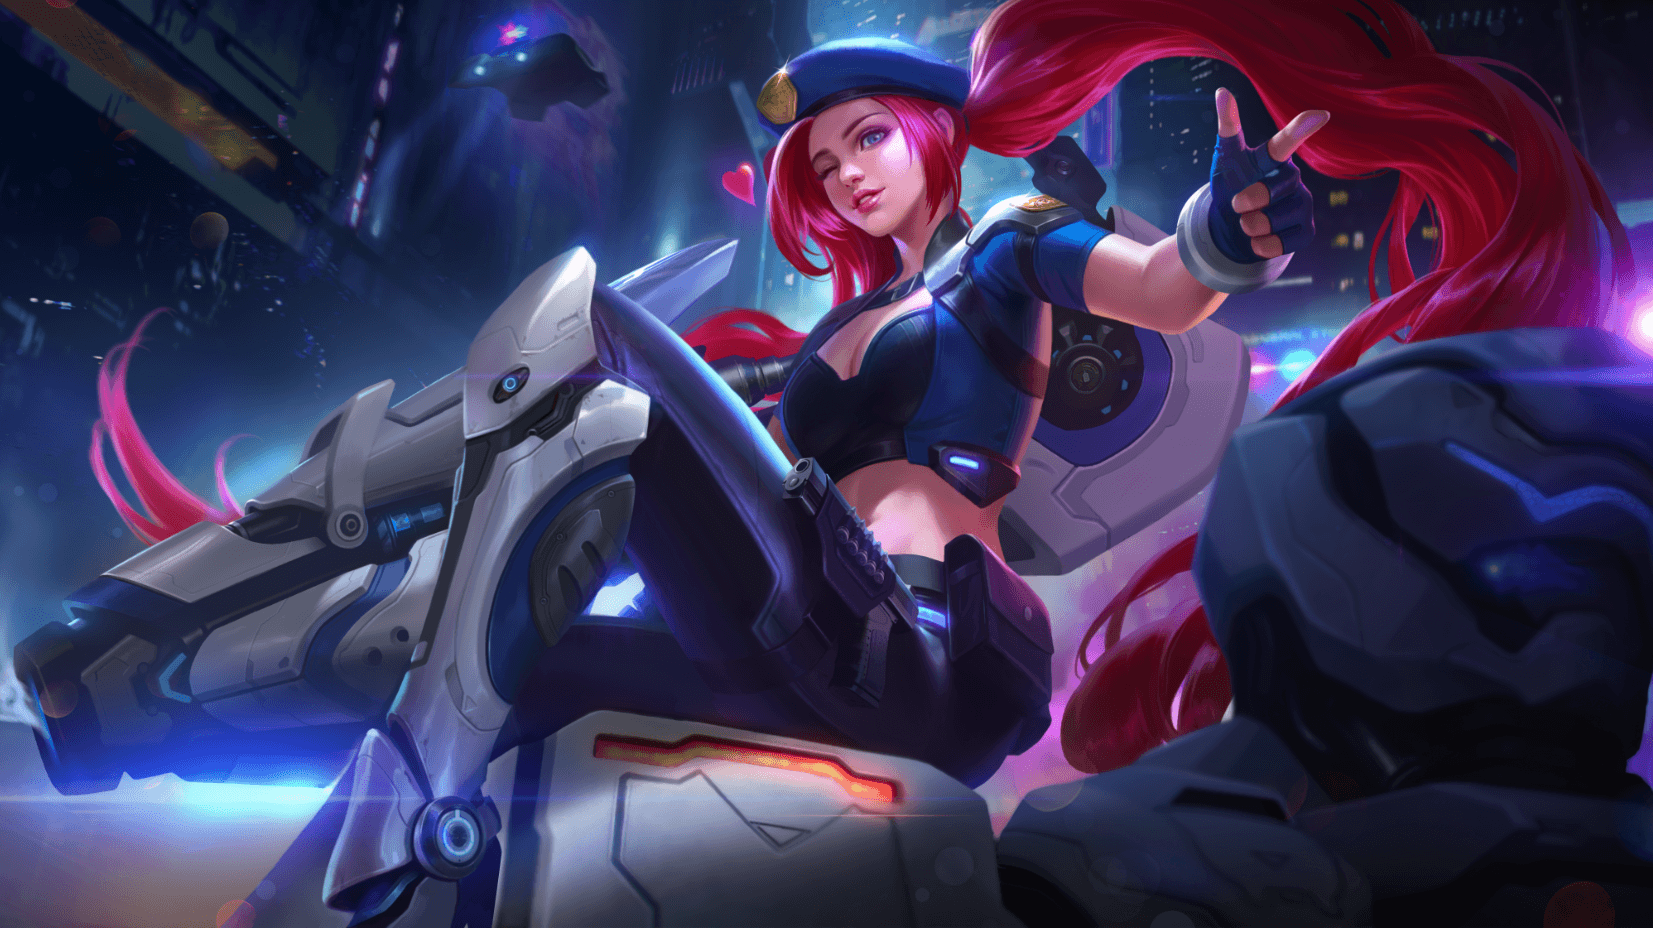 Free download Layla S A B E R Squad Mobile Legends Wallpaper Layla